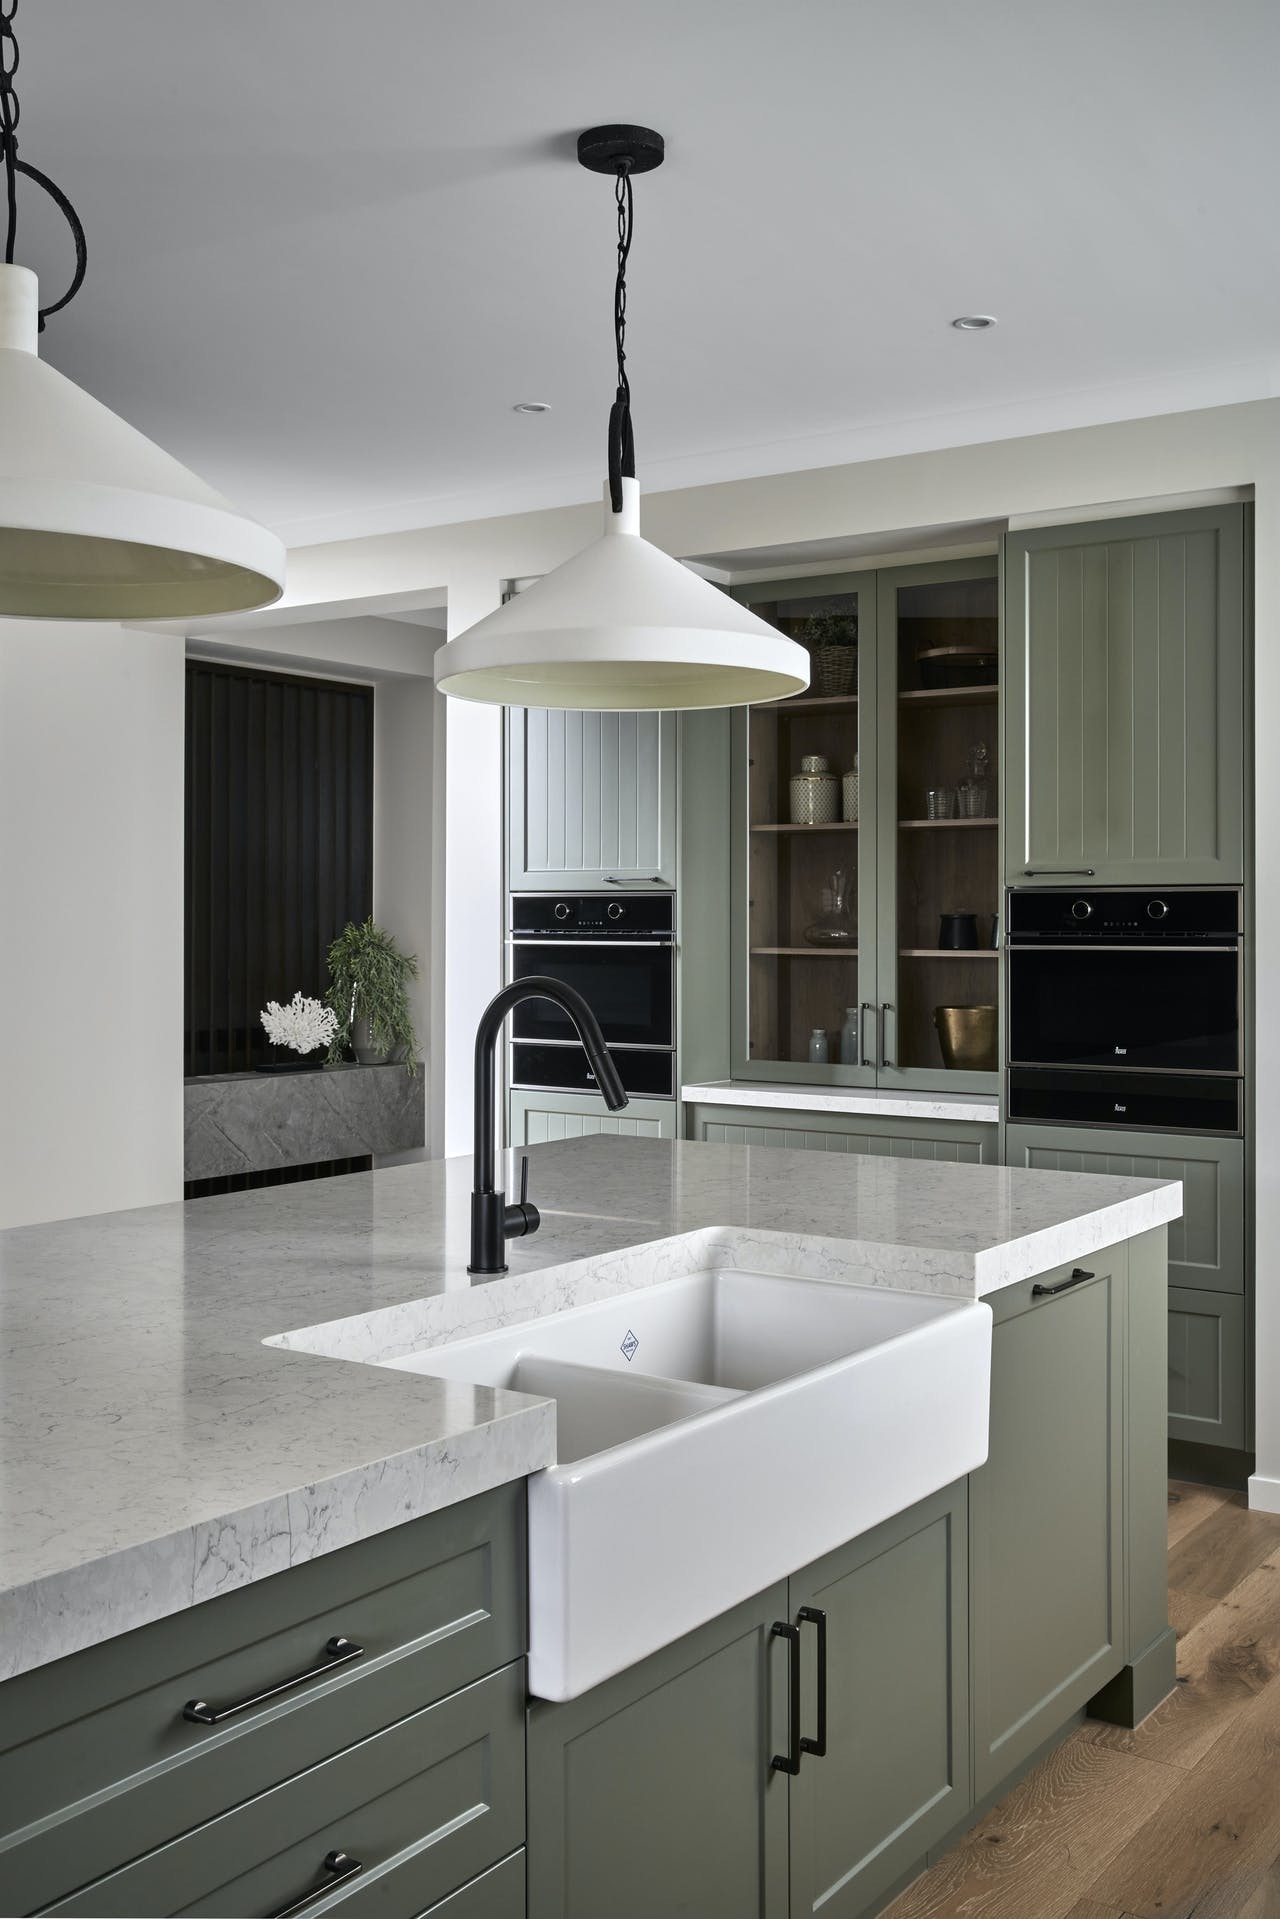 gumnut green kitchen cabinets in country kitchen with black tapware metricon sovereign